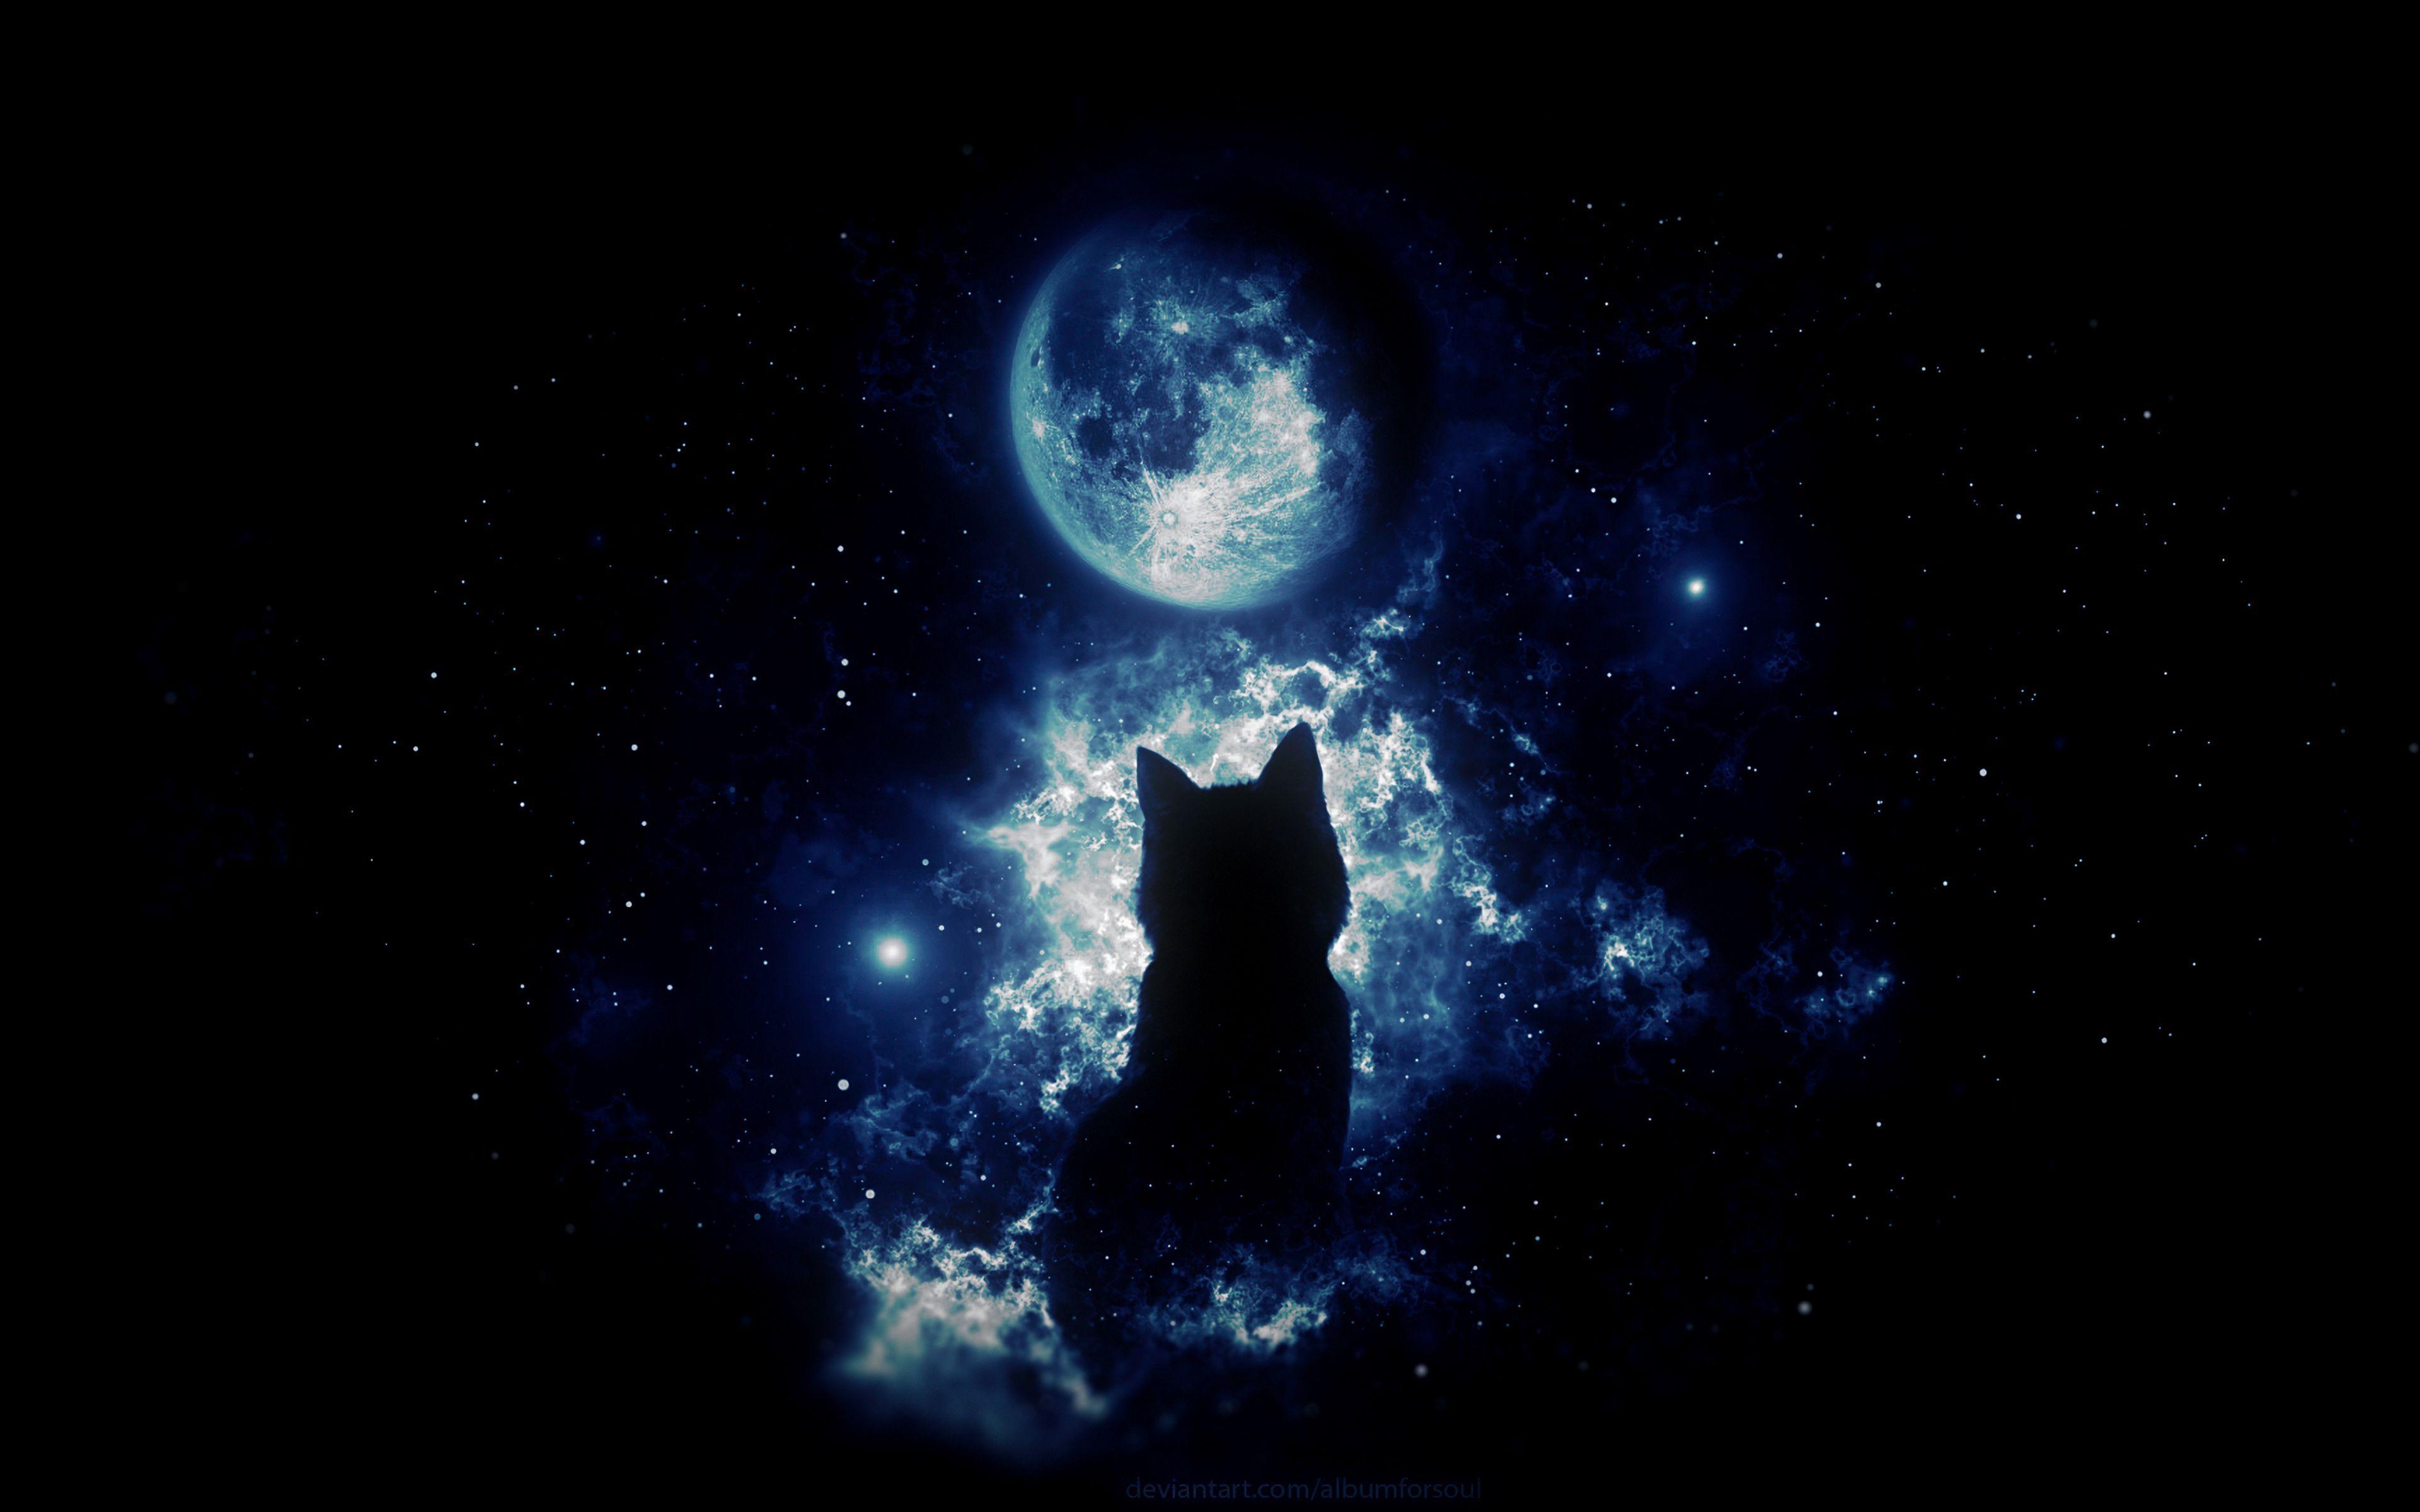 Cat and Moon Wallpapers - Top Free Cat and Moon Backgrounds